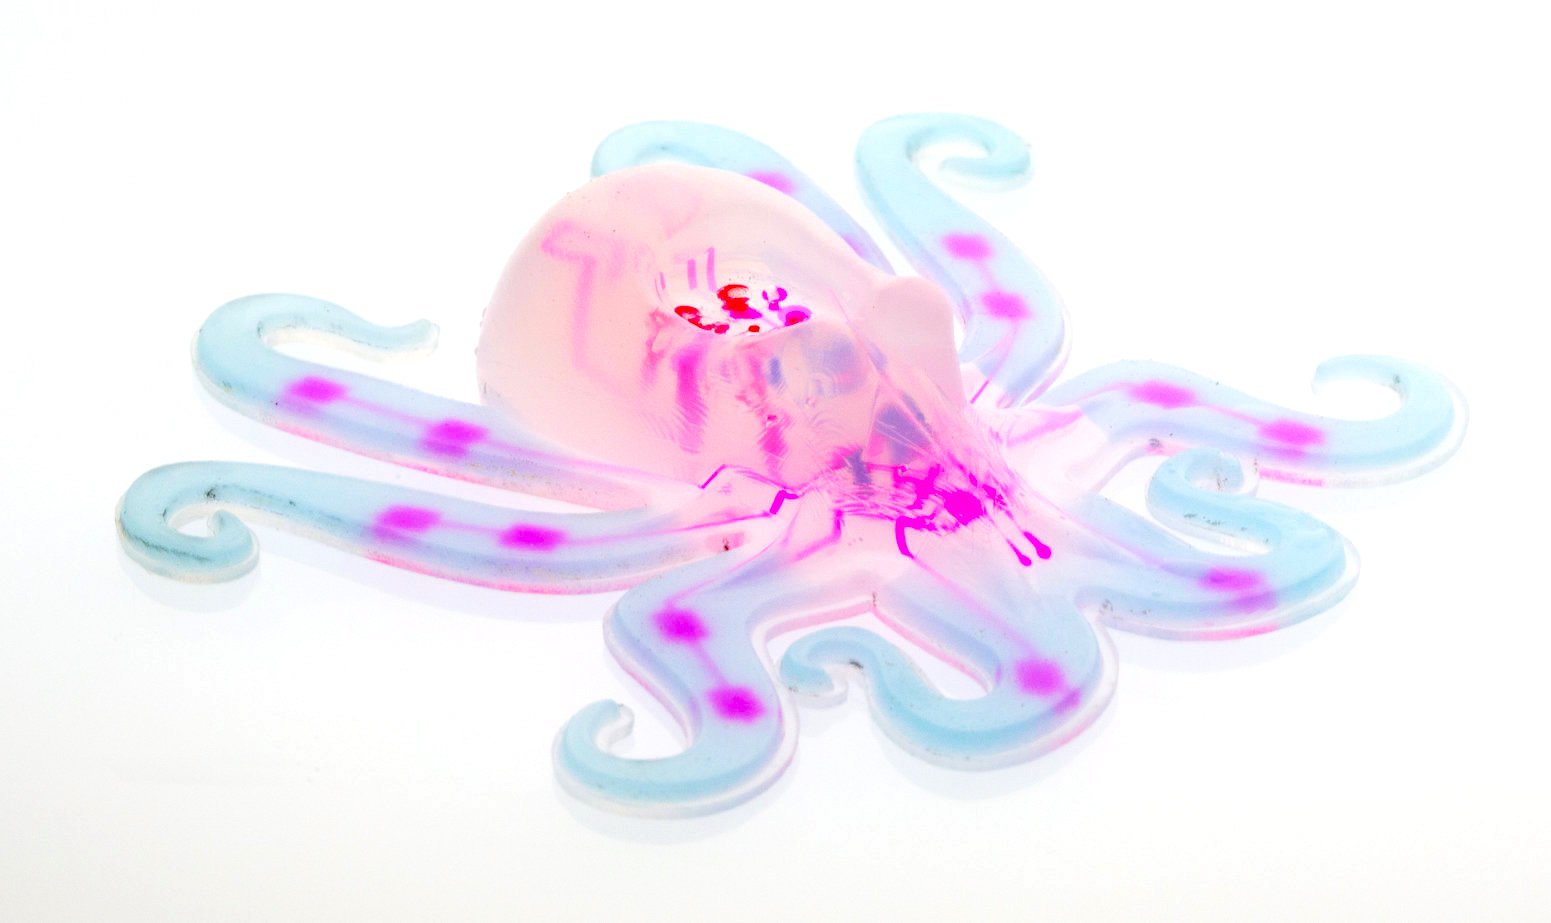 Peroxide Powered Octobot